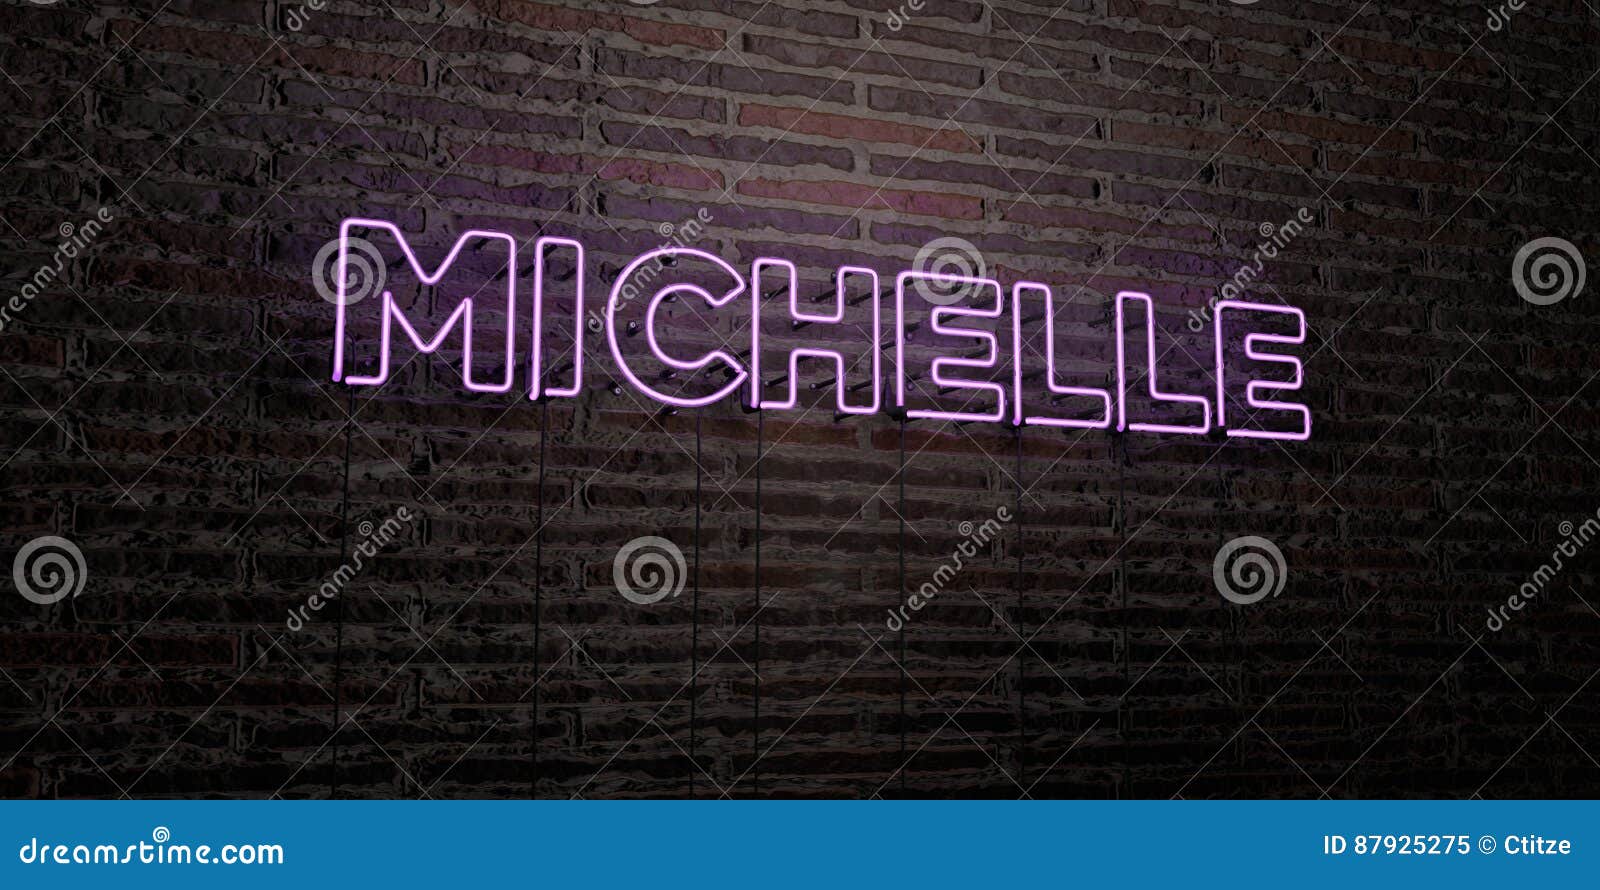 MICHELLE -Realistic Neon Sign on Brick Wall Background - 3D Rendered  Royalty Free Stock Image Stock Illustration - Illustration of brick, dark:  87925275